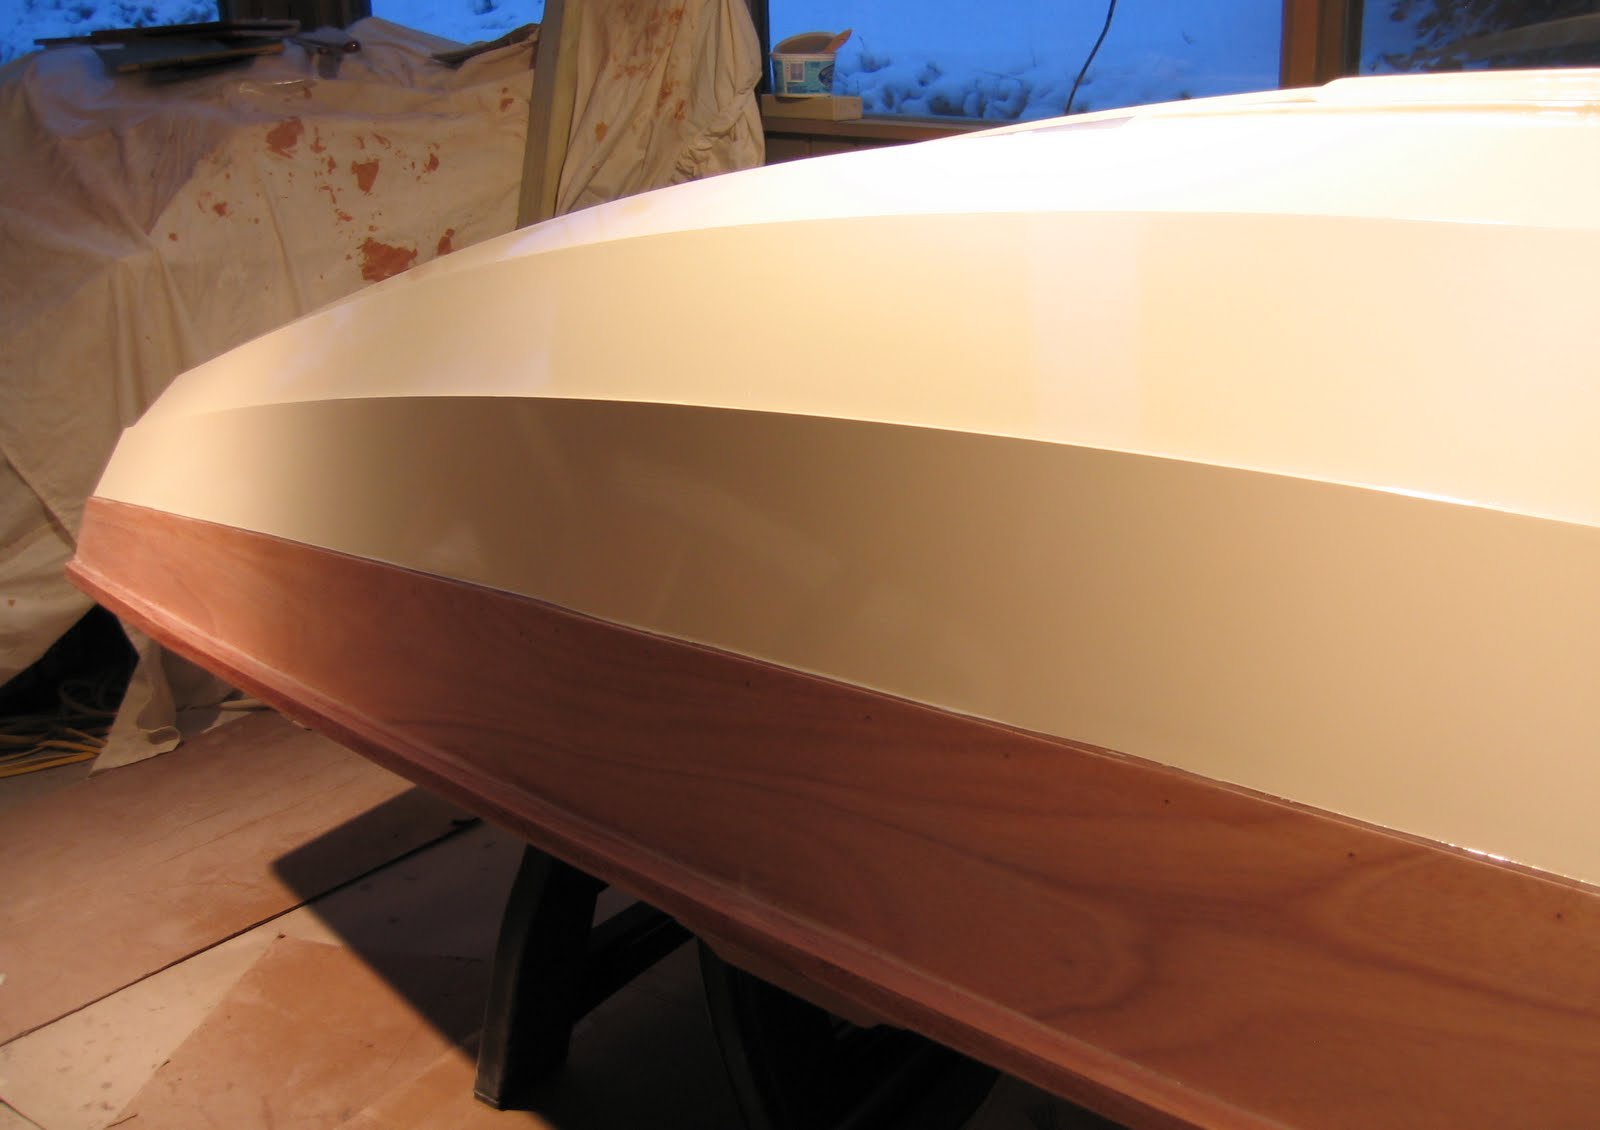 My last paint job was on the Passagemaker Dinghy. I used Hatteras (off 